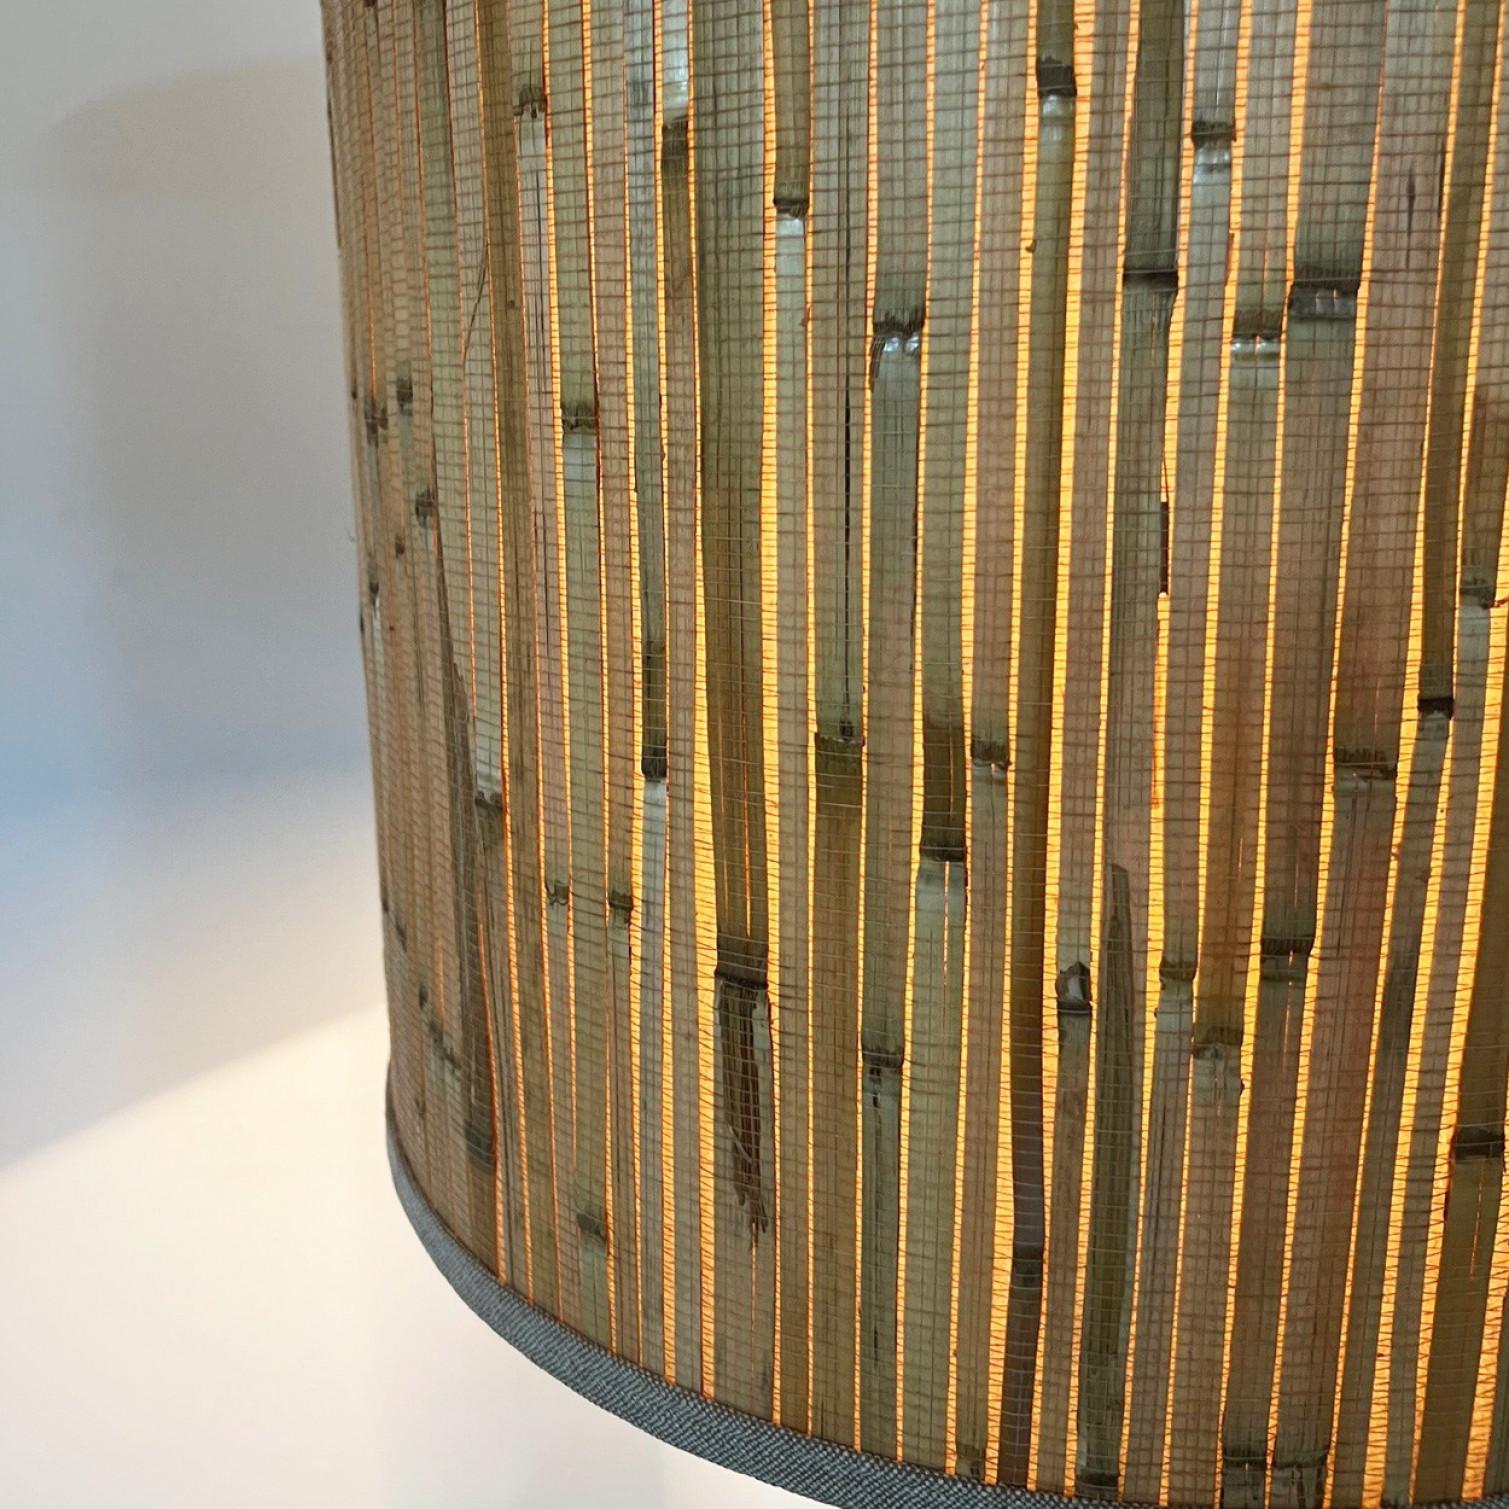 Pair of floor Lamps Gold Brass and Wood by Ingo Maurer, Europe, Germany, 1968 For Sale 3